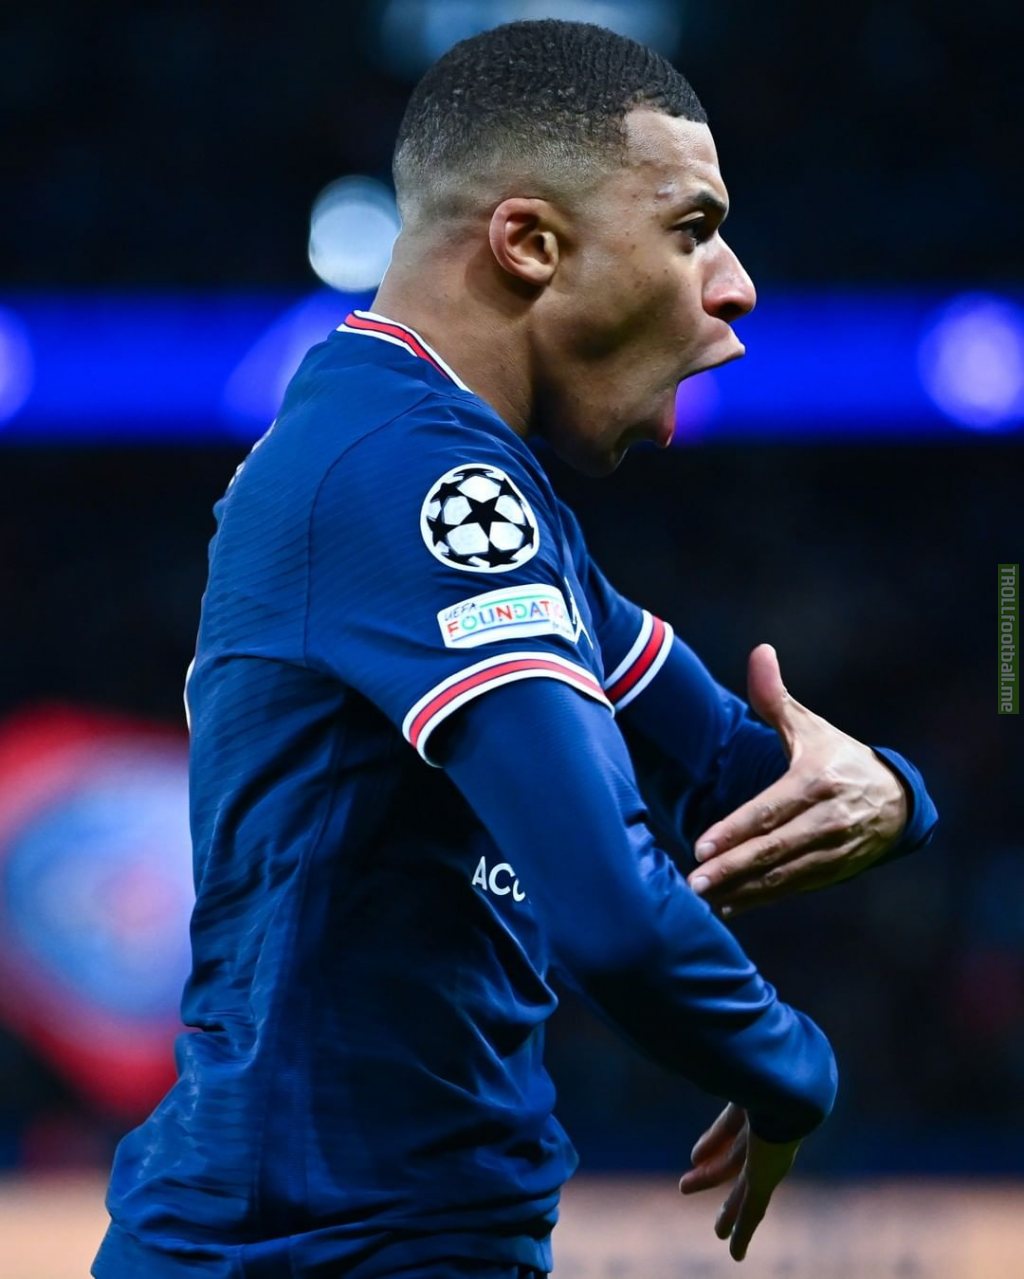 Mbappé is the youngest player ever to reach 30+ UCL goals (22 years, 352 days)